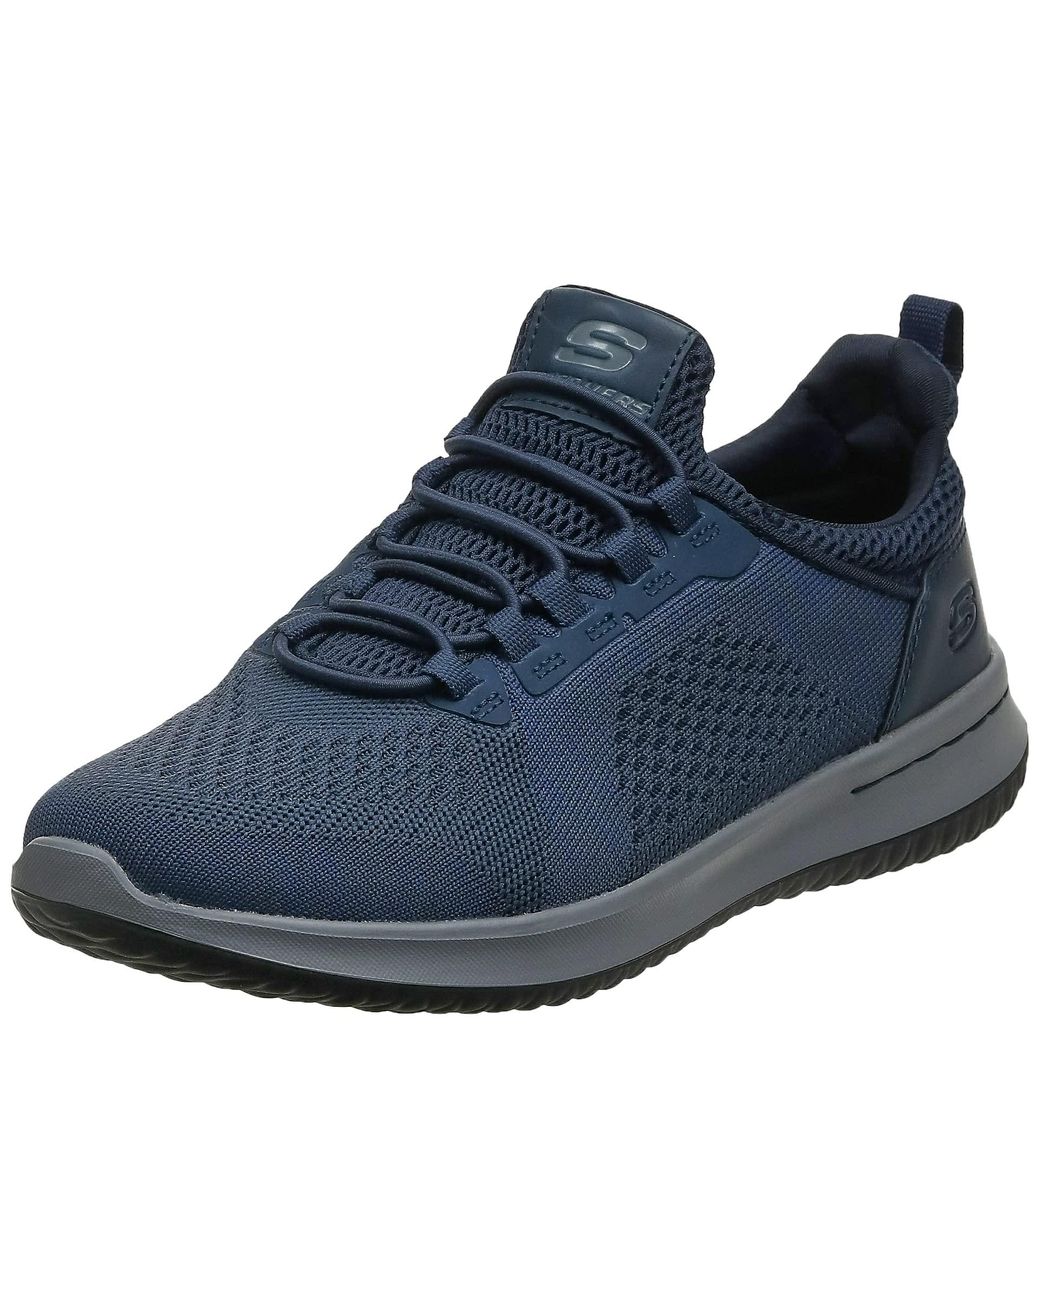 Skechers Usa Relaxed Fit-delson-brewton M Us,blue for |